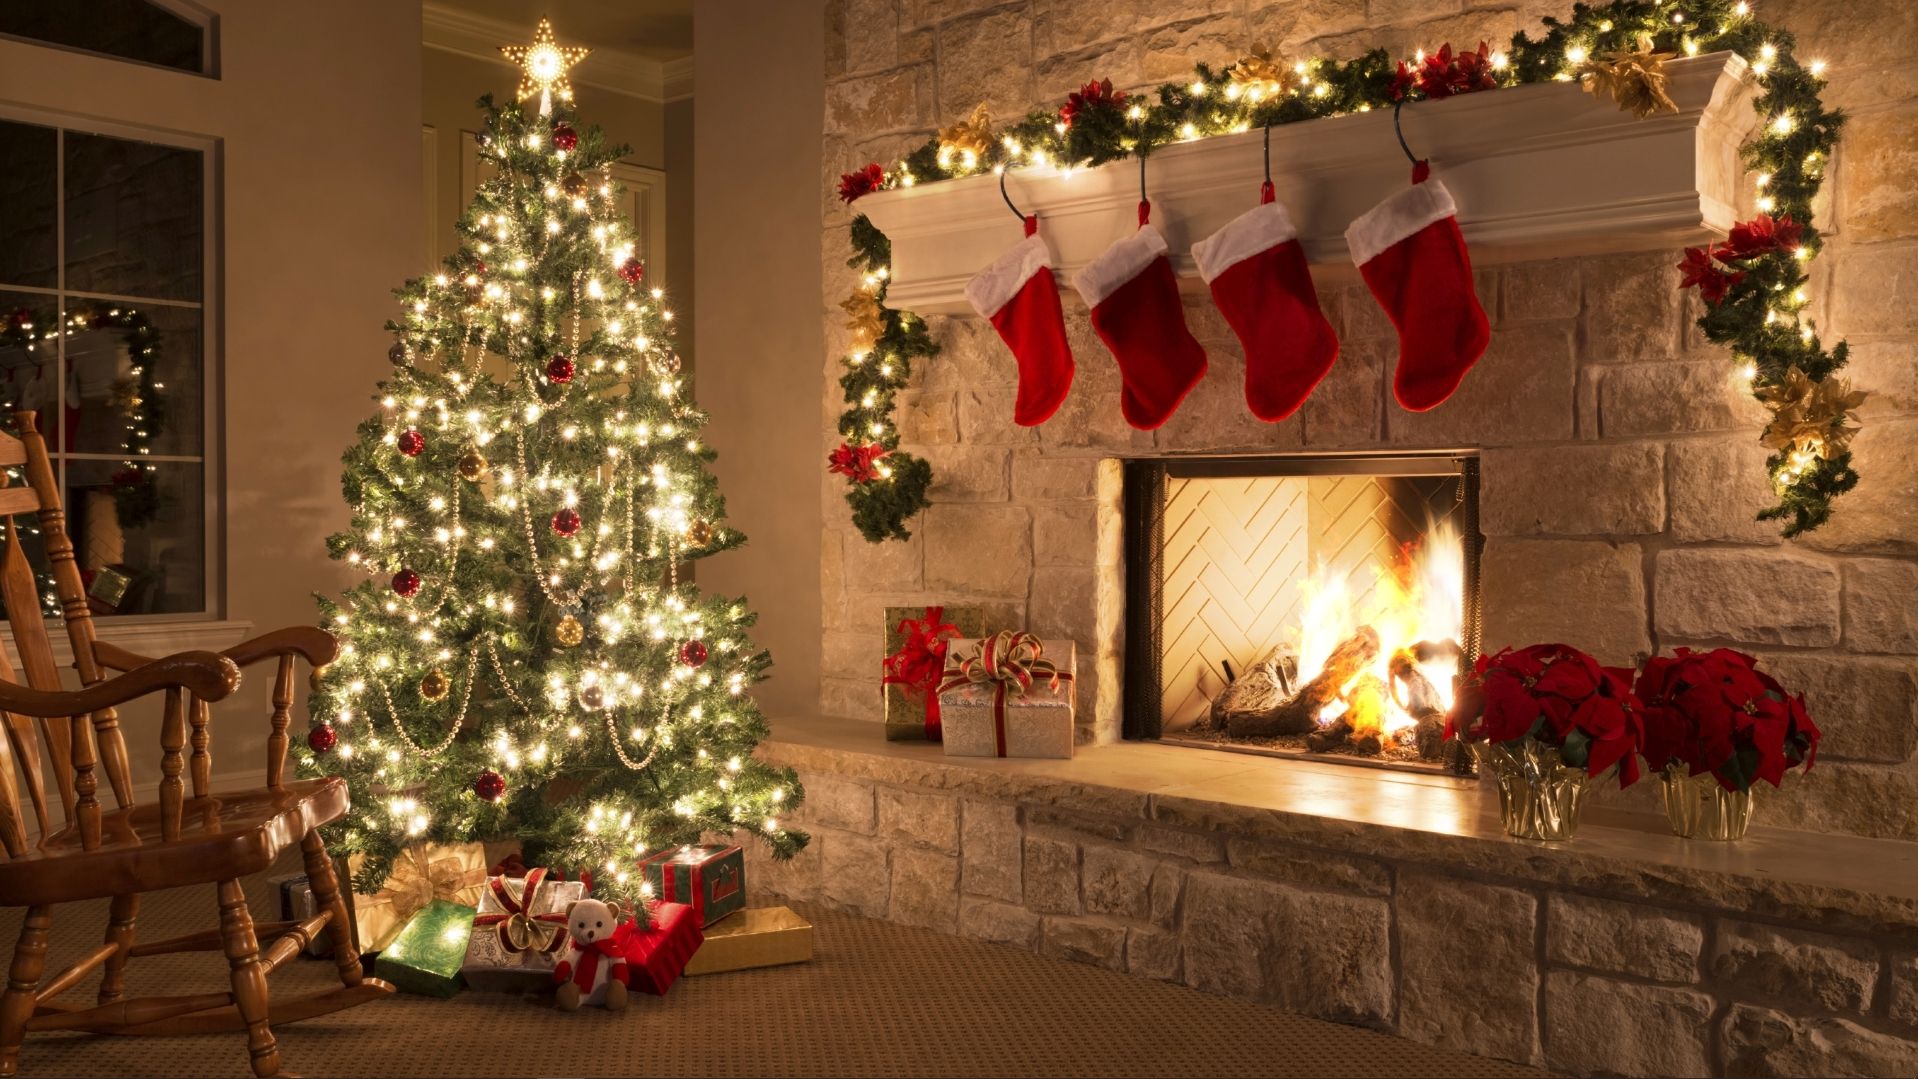 Christmas fireplace in a cozy room live wallpaper download